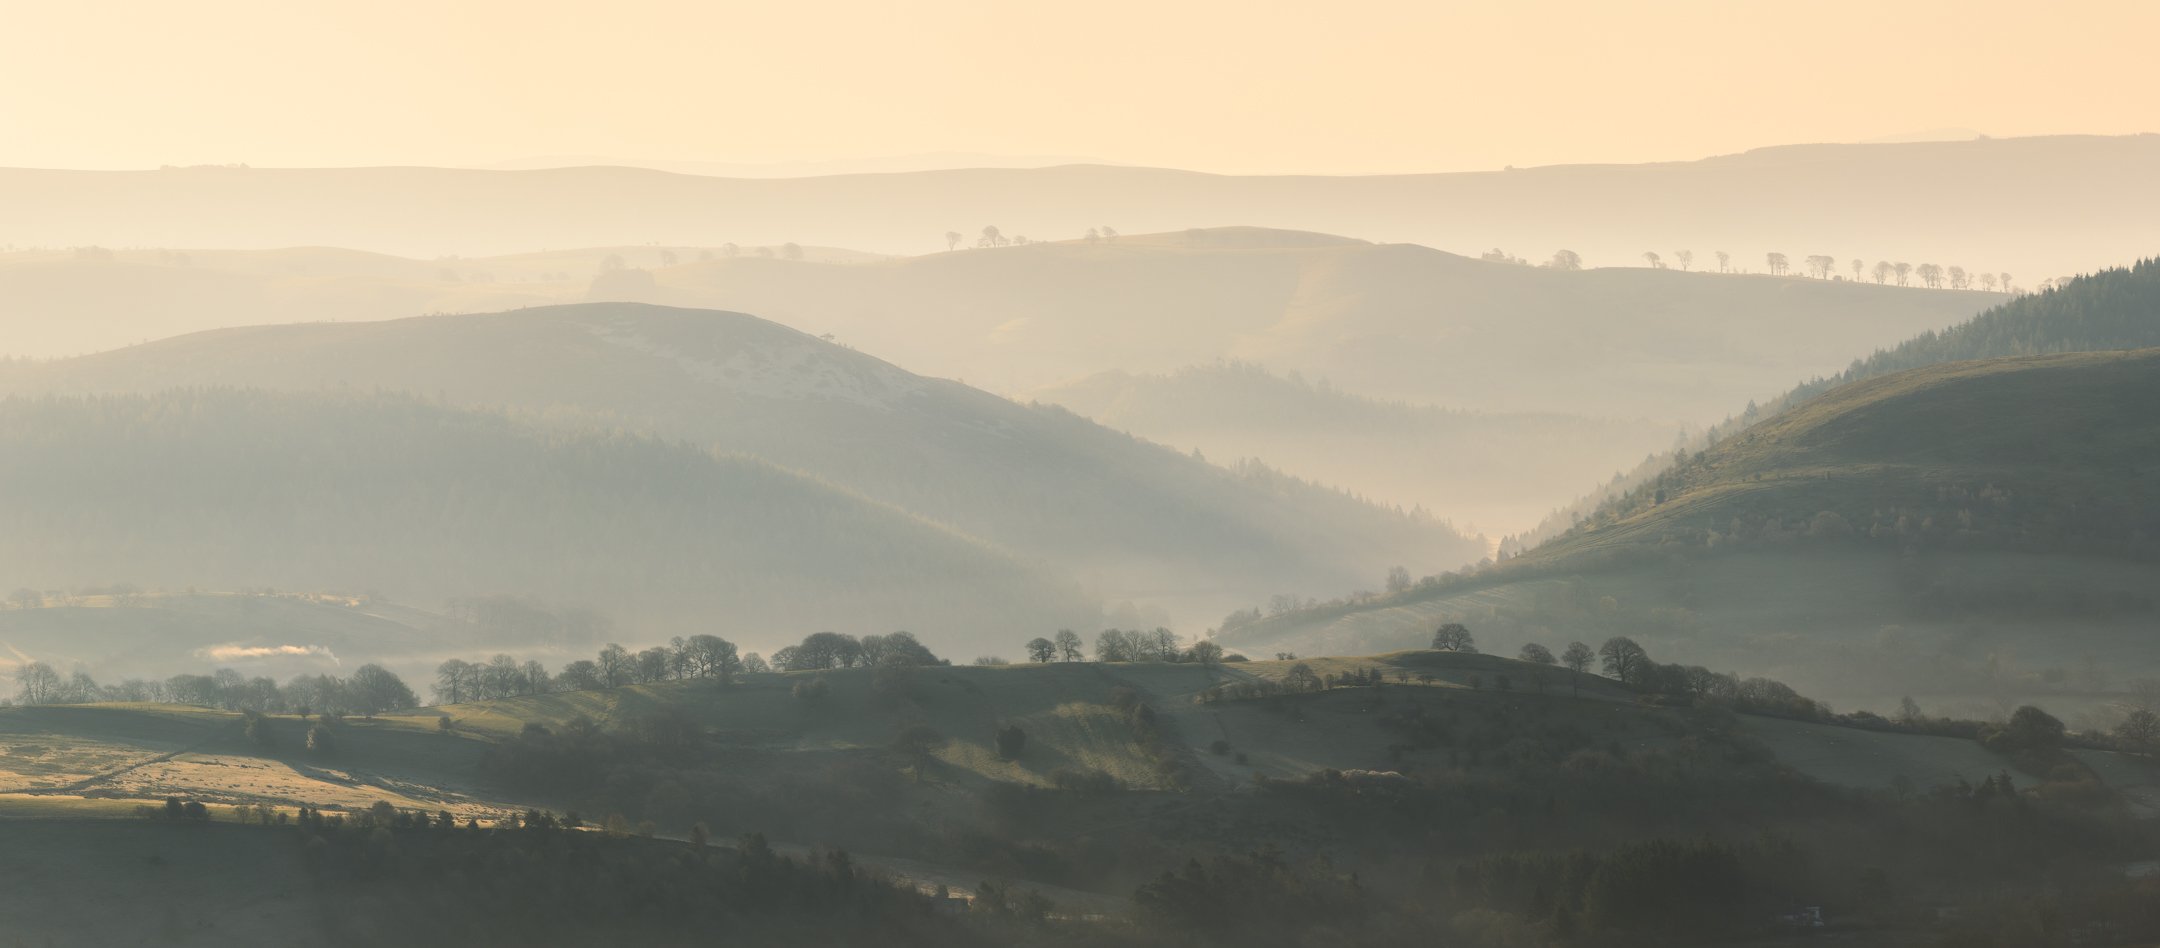 Layers of Hills in Shropshire